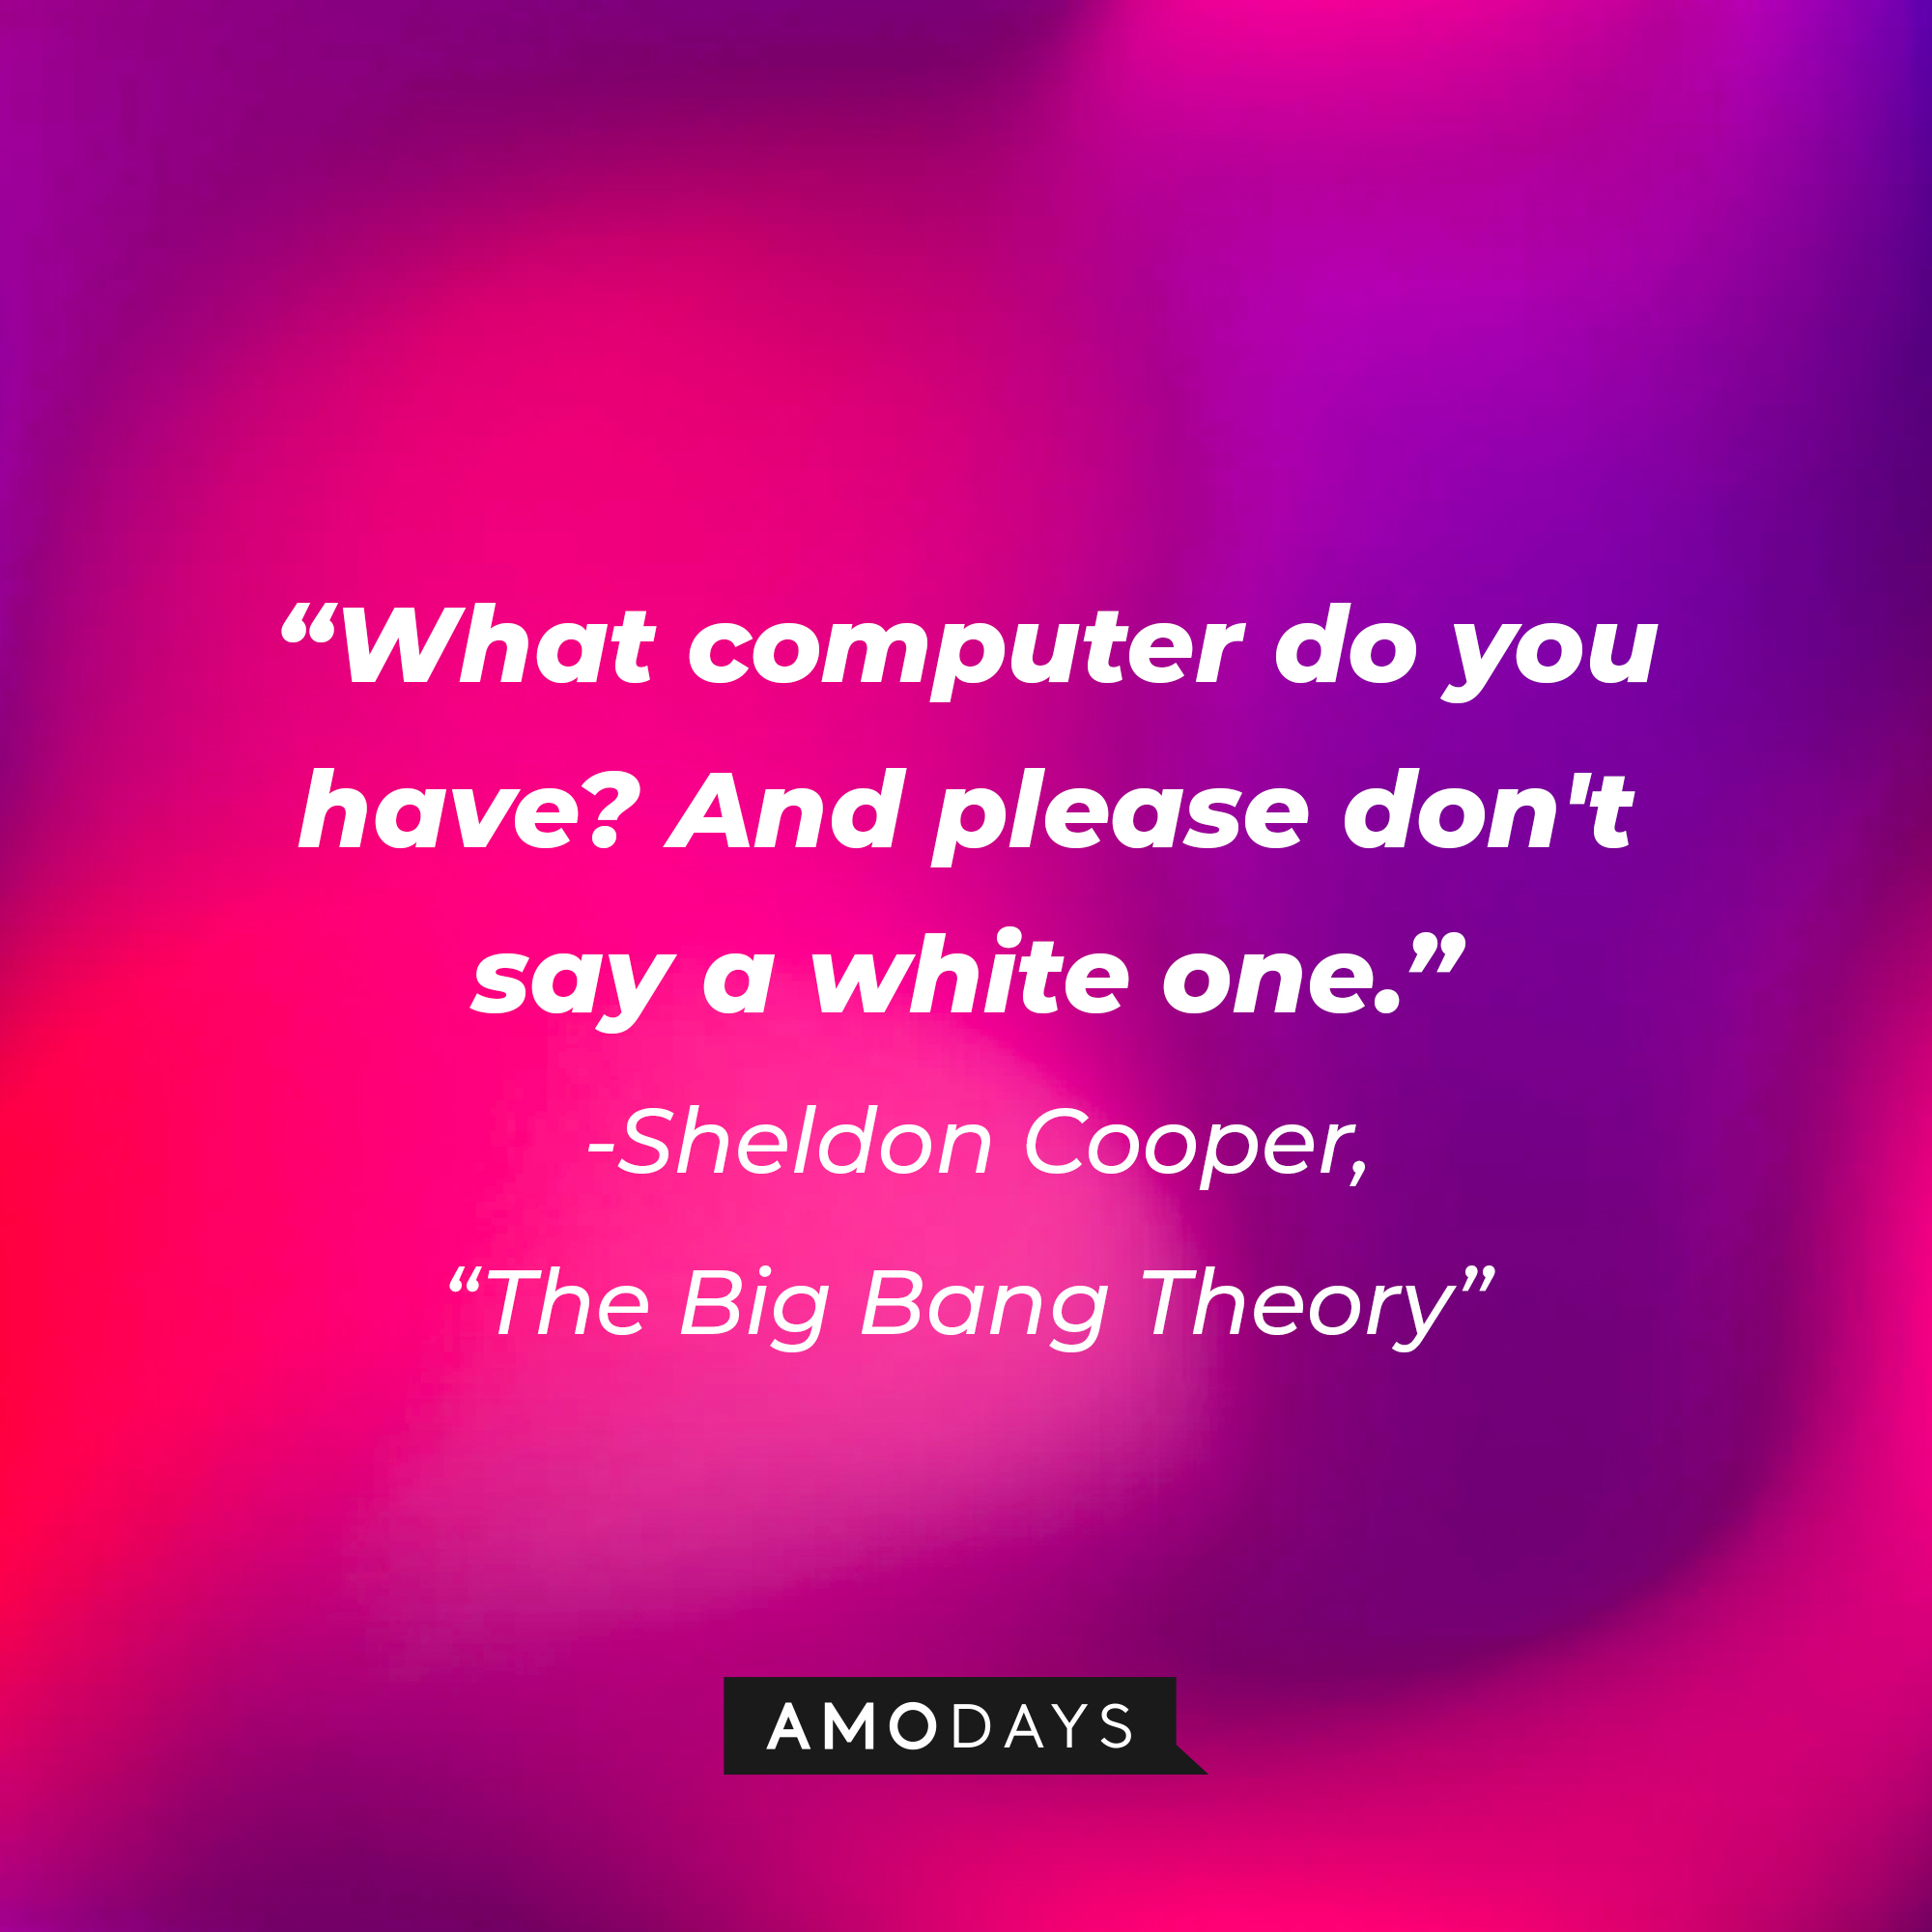 Sheldon Cooper's quote from "The Big Bang Theory": "What computer do you have? And please don't say a white one." | Source: Amodays